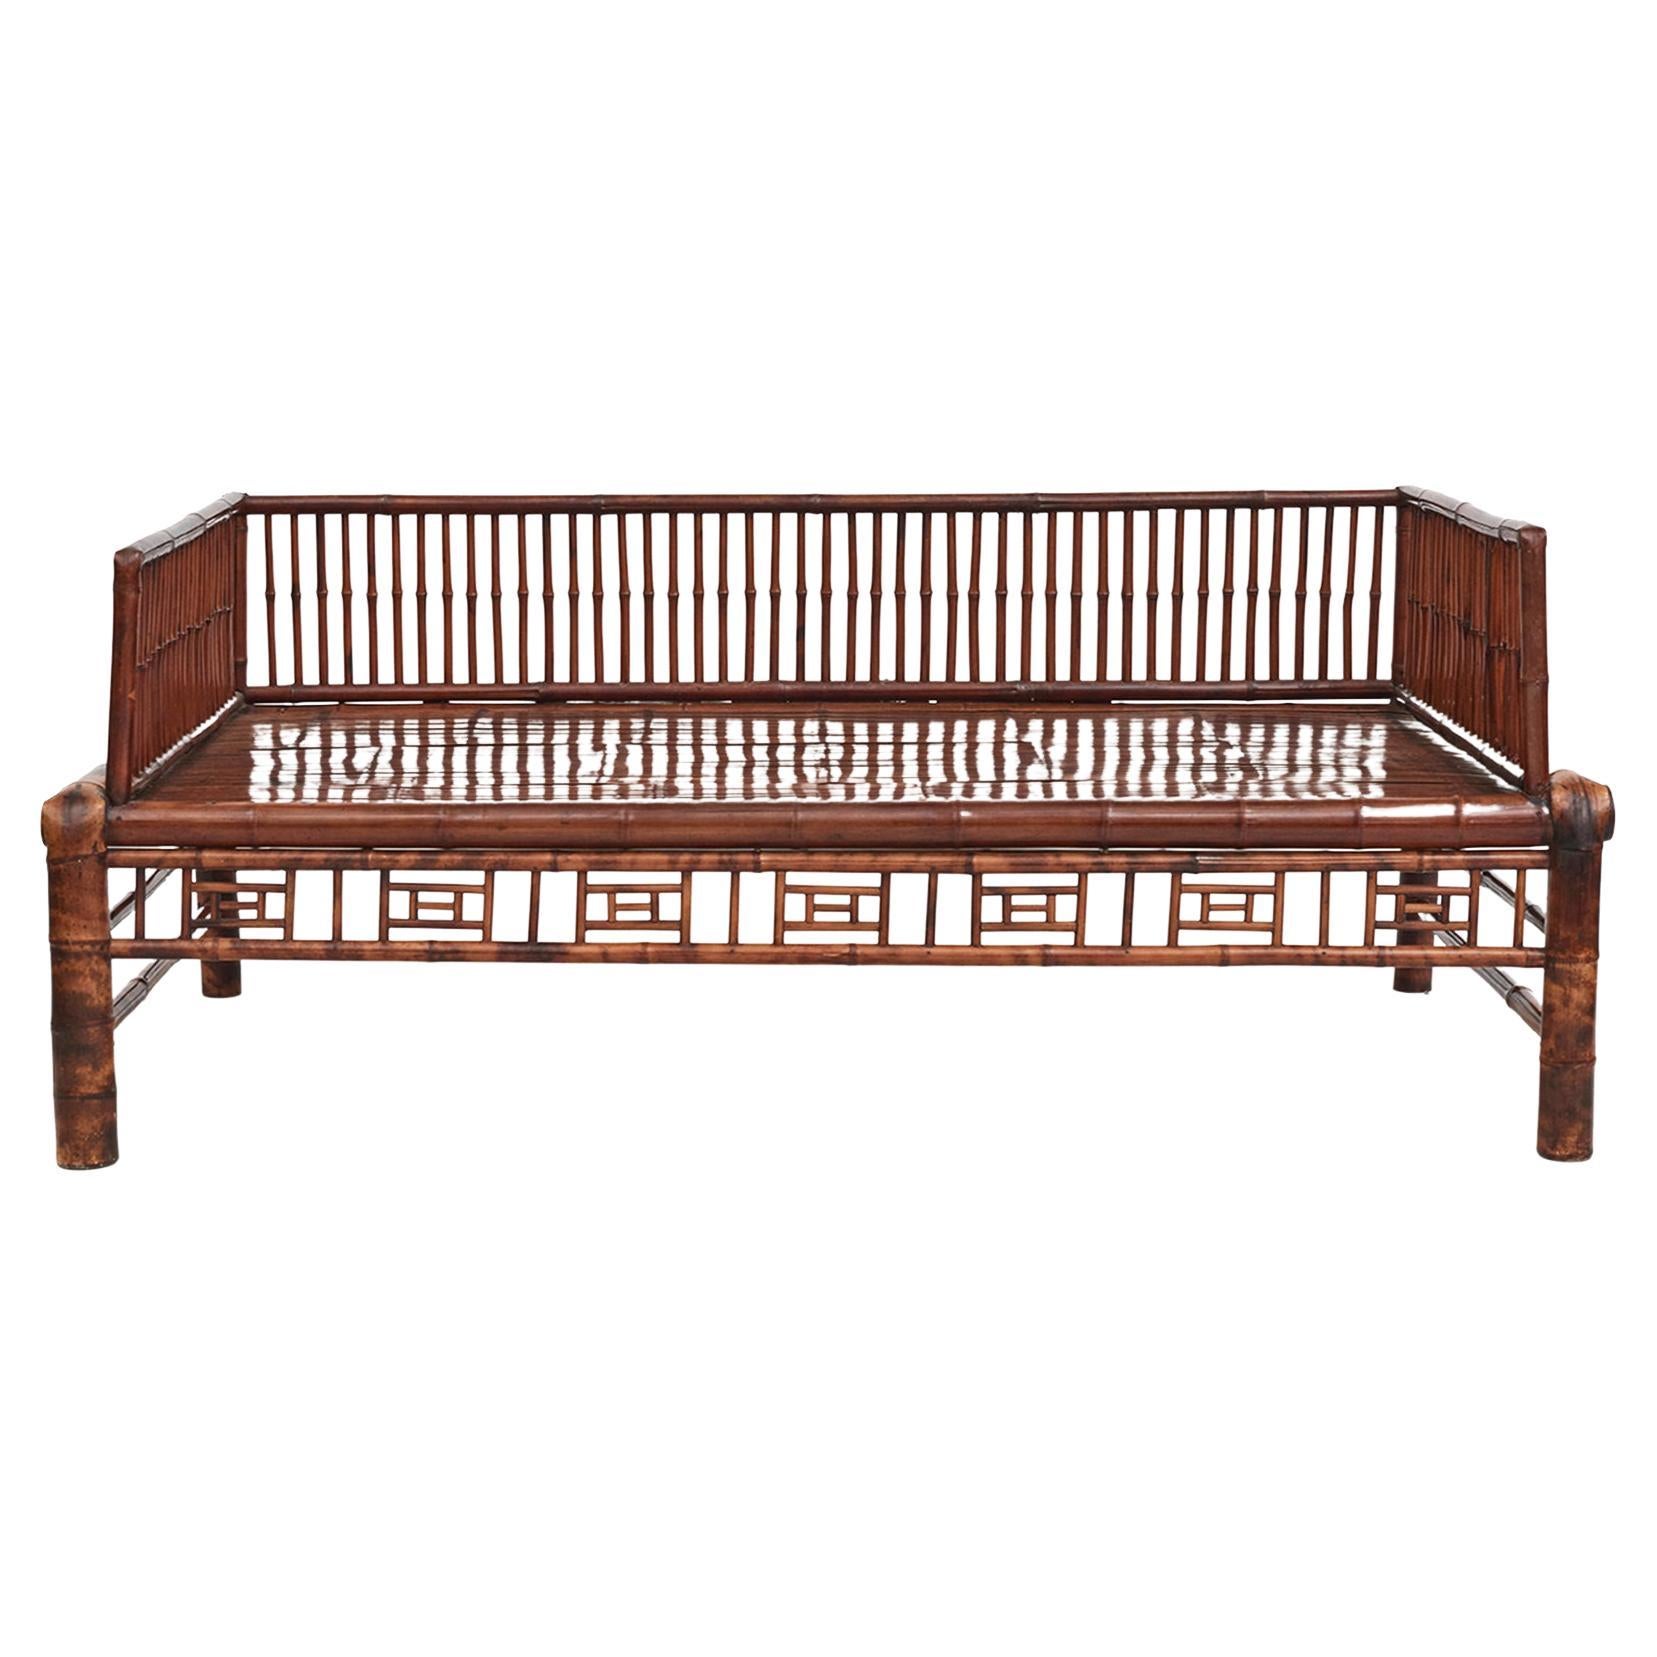 Chinese Daybed "Tiger bamboo" For Sale